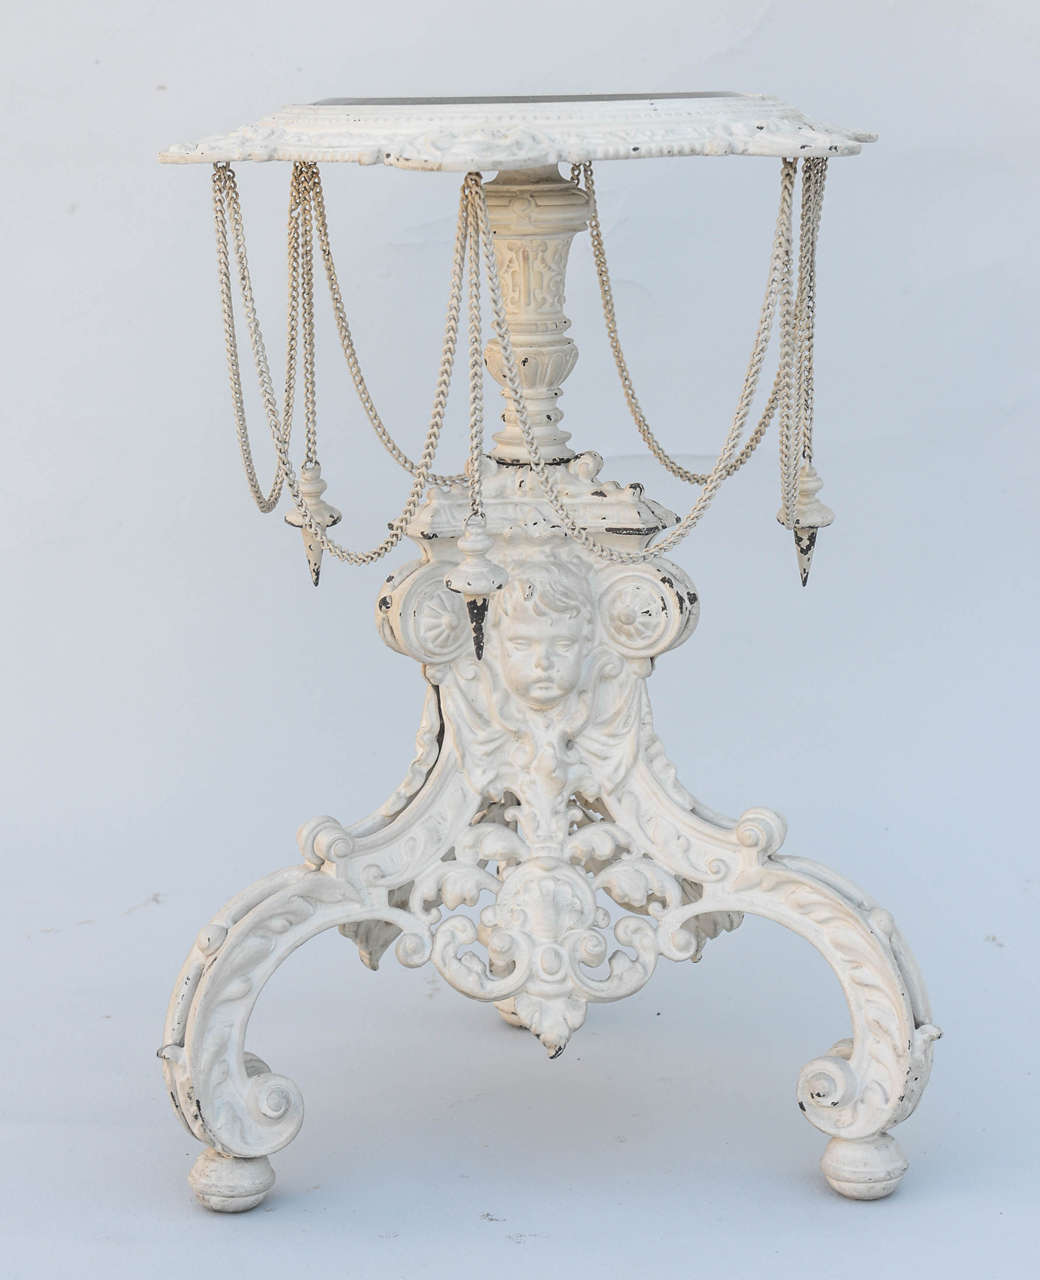 Pedestal or stand, of wrought iron, having distressed painted finish, top inset with round beveled glass, raised on tripartite base with putti heads and draped with metal chain.

Stock ID: D9228